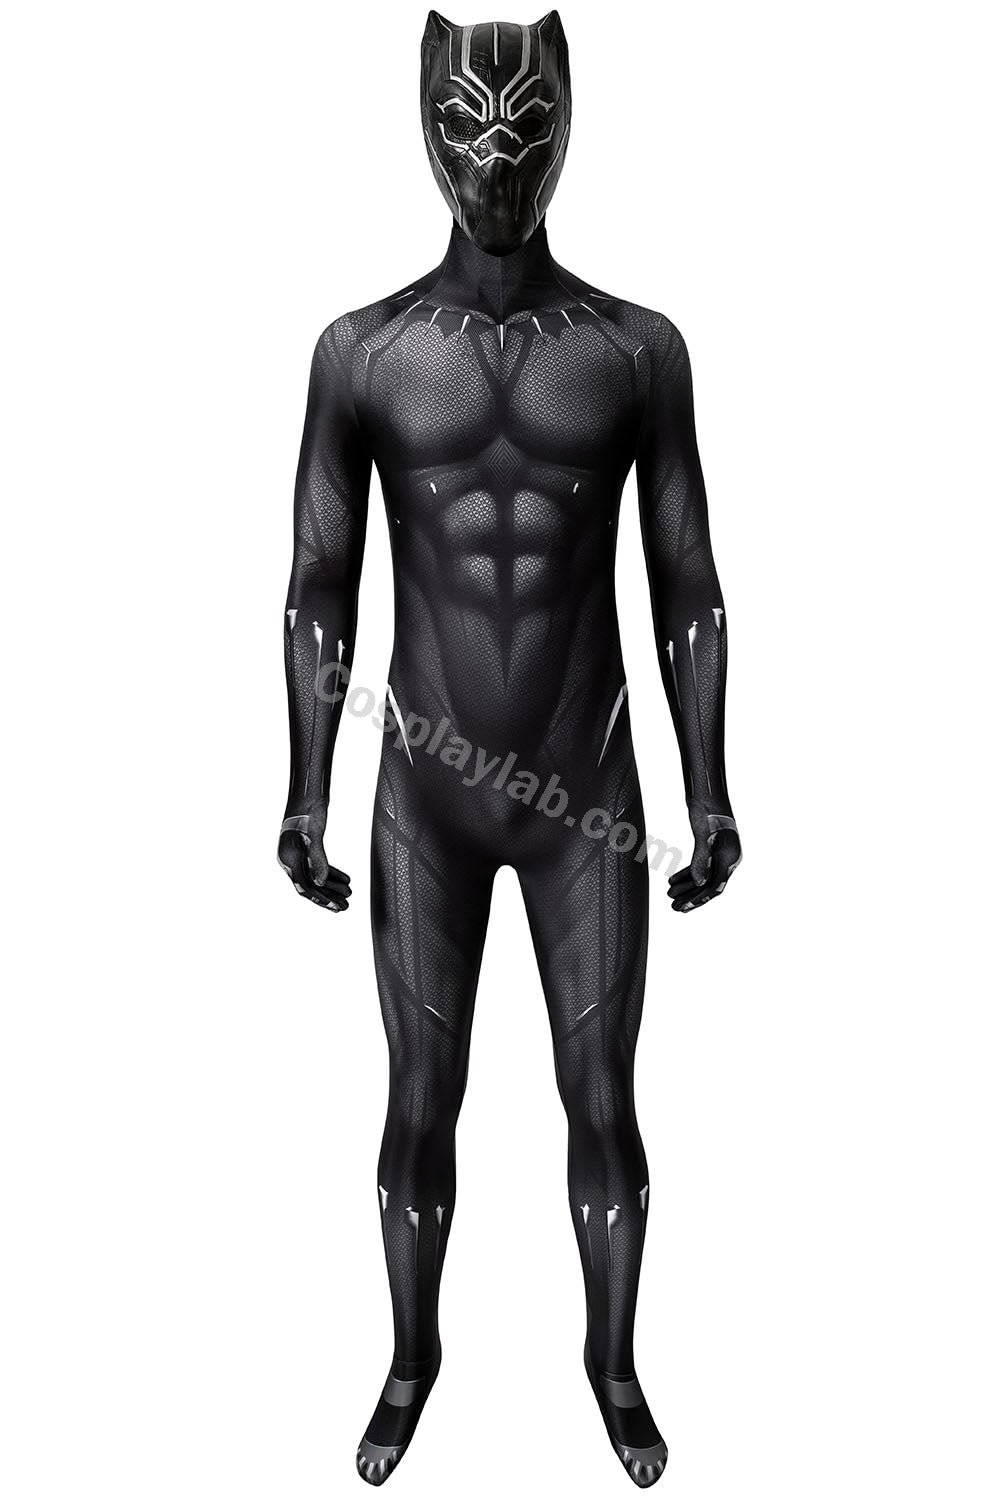 Black Panther Cosplay Suit T'challa Cosplay Costume 3D Printed Edition By CosplayLab